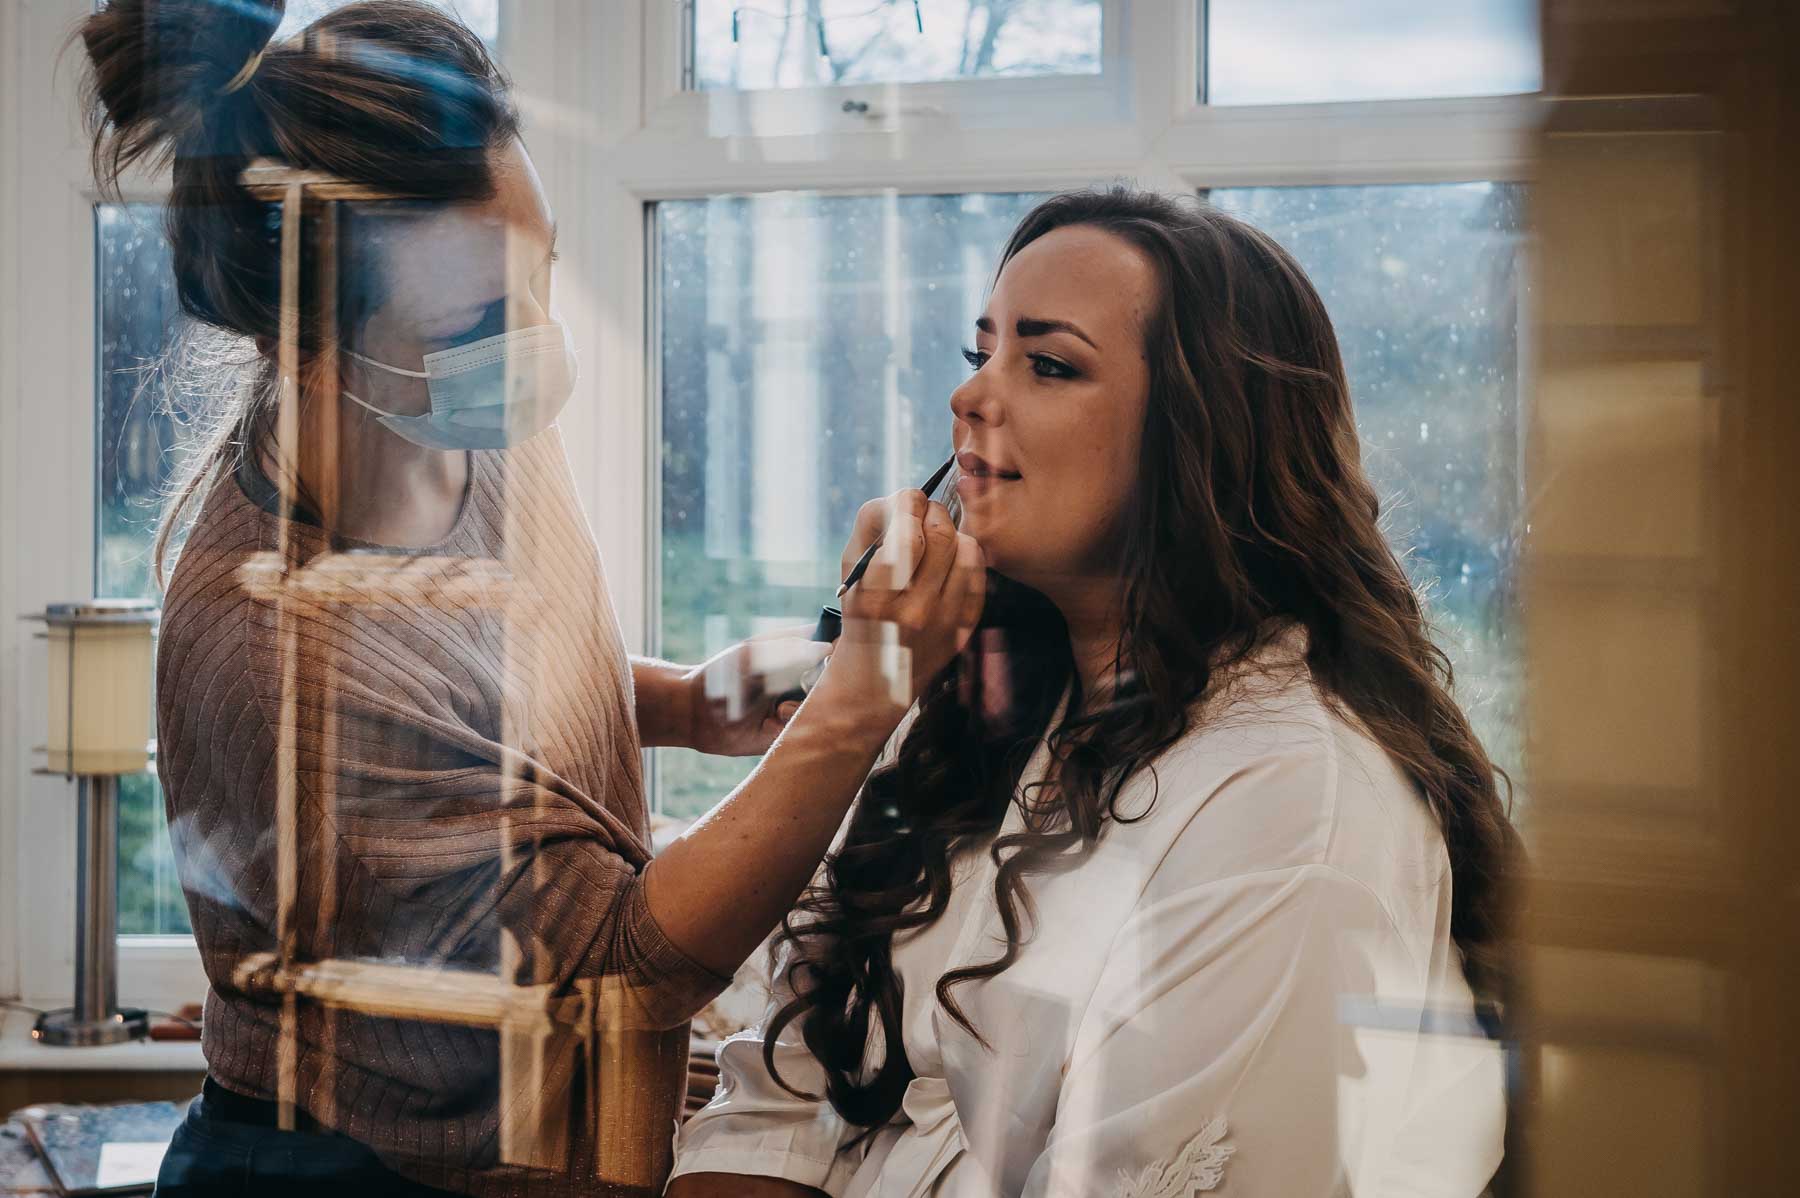 bride preparation for wedding - unposed natural wedding photography Wales